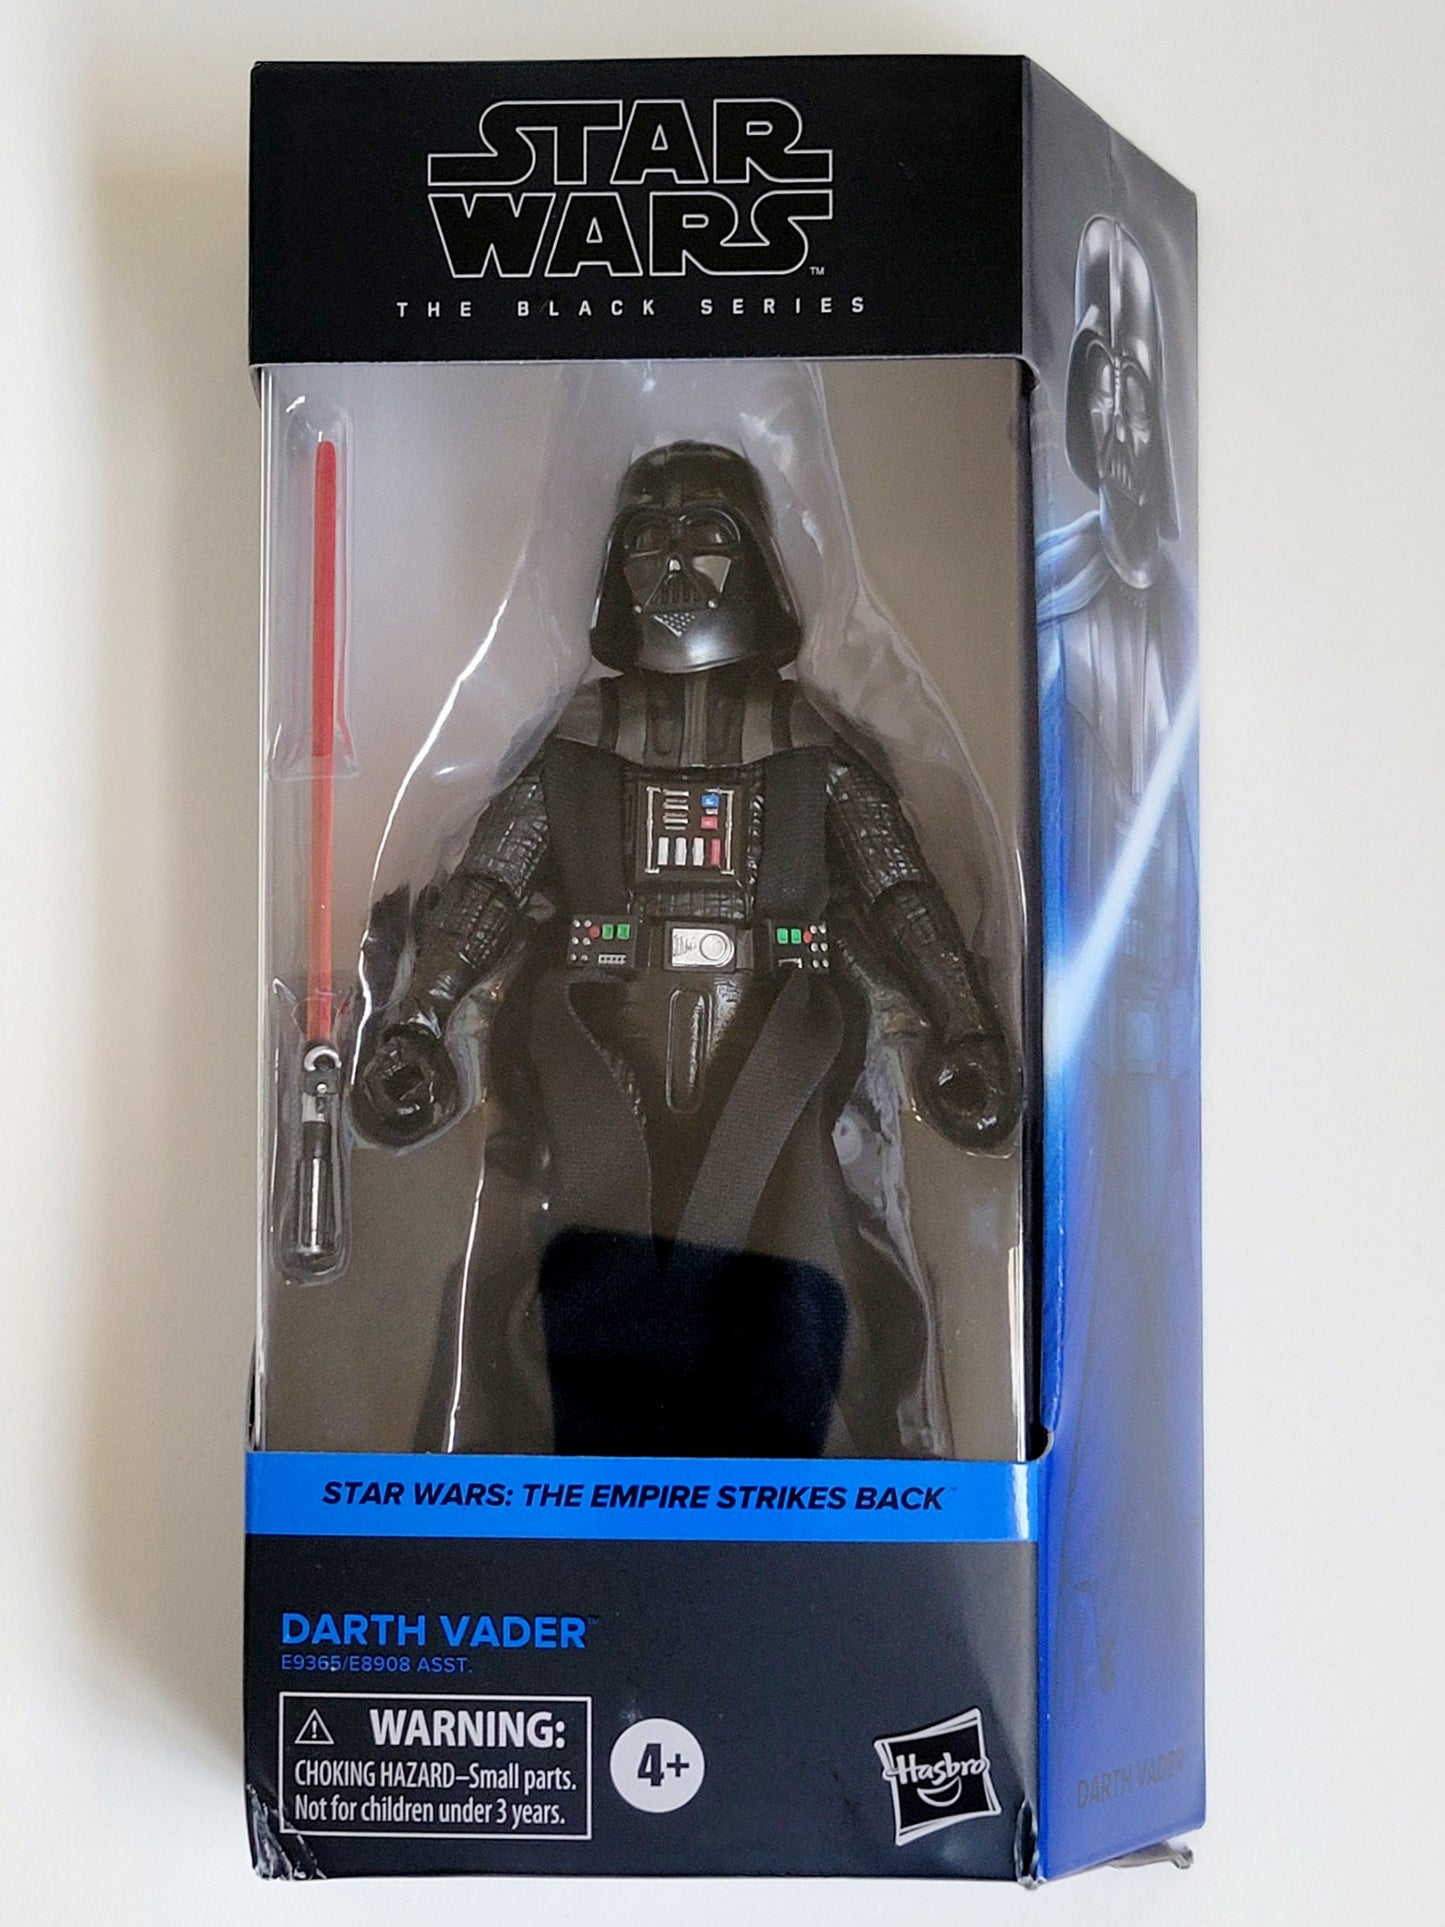 Sar Wars: The Black Series Darth Vader 6-Inch Action Figure from Star Wars: The Empire Strikes Back